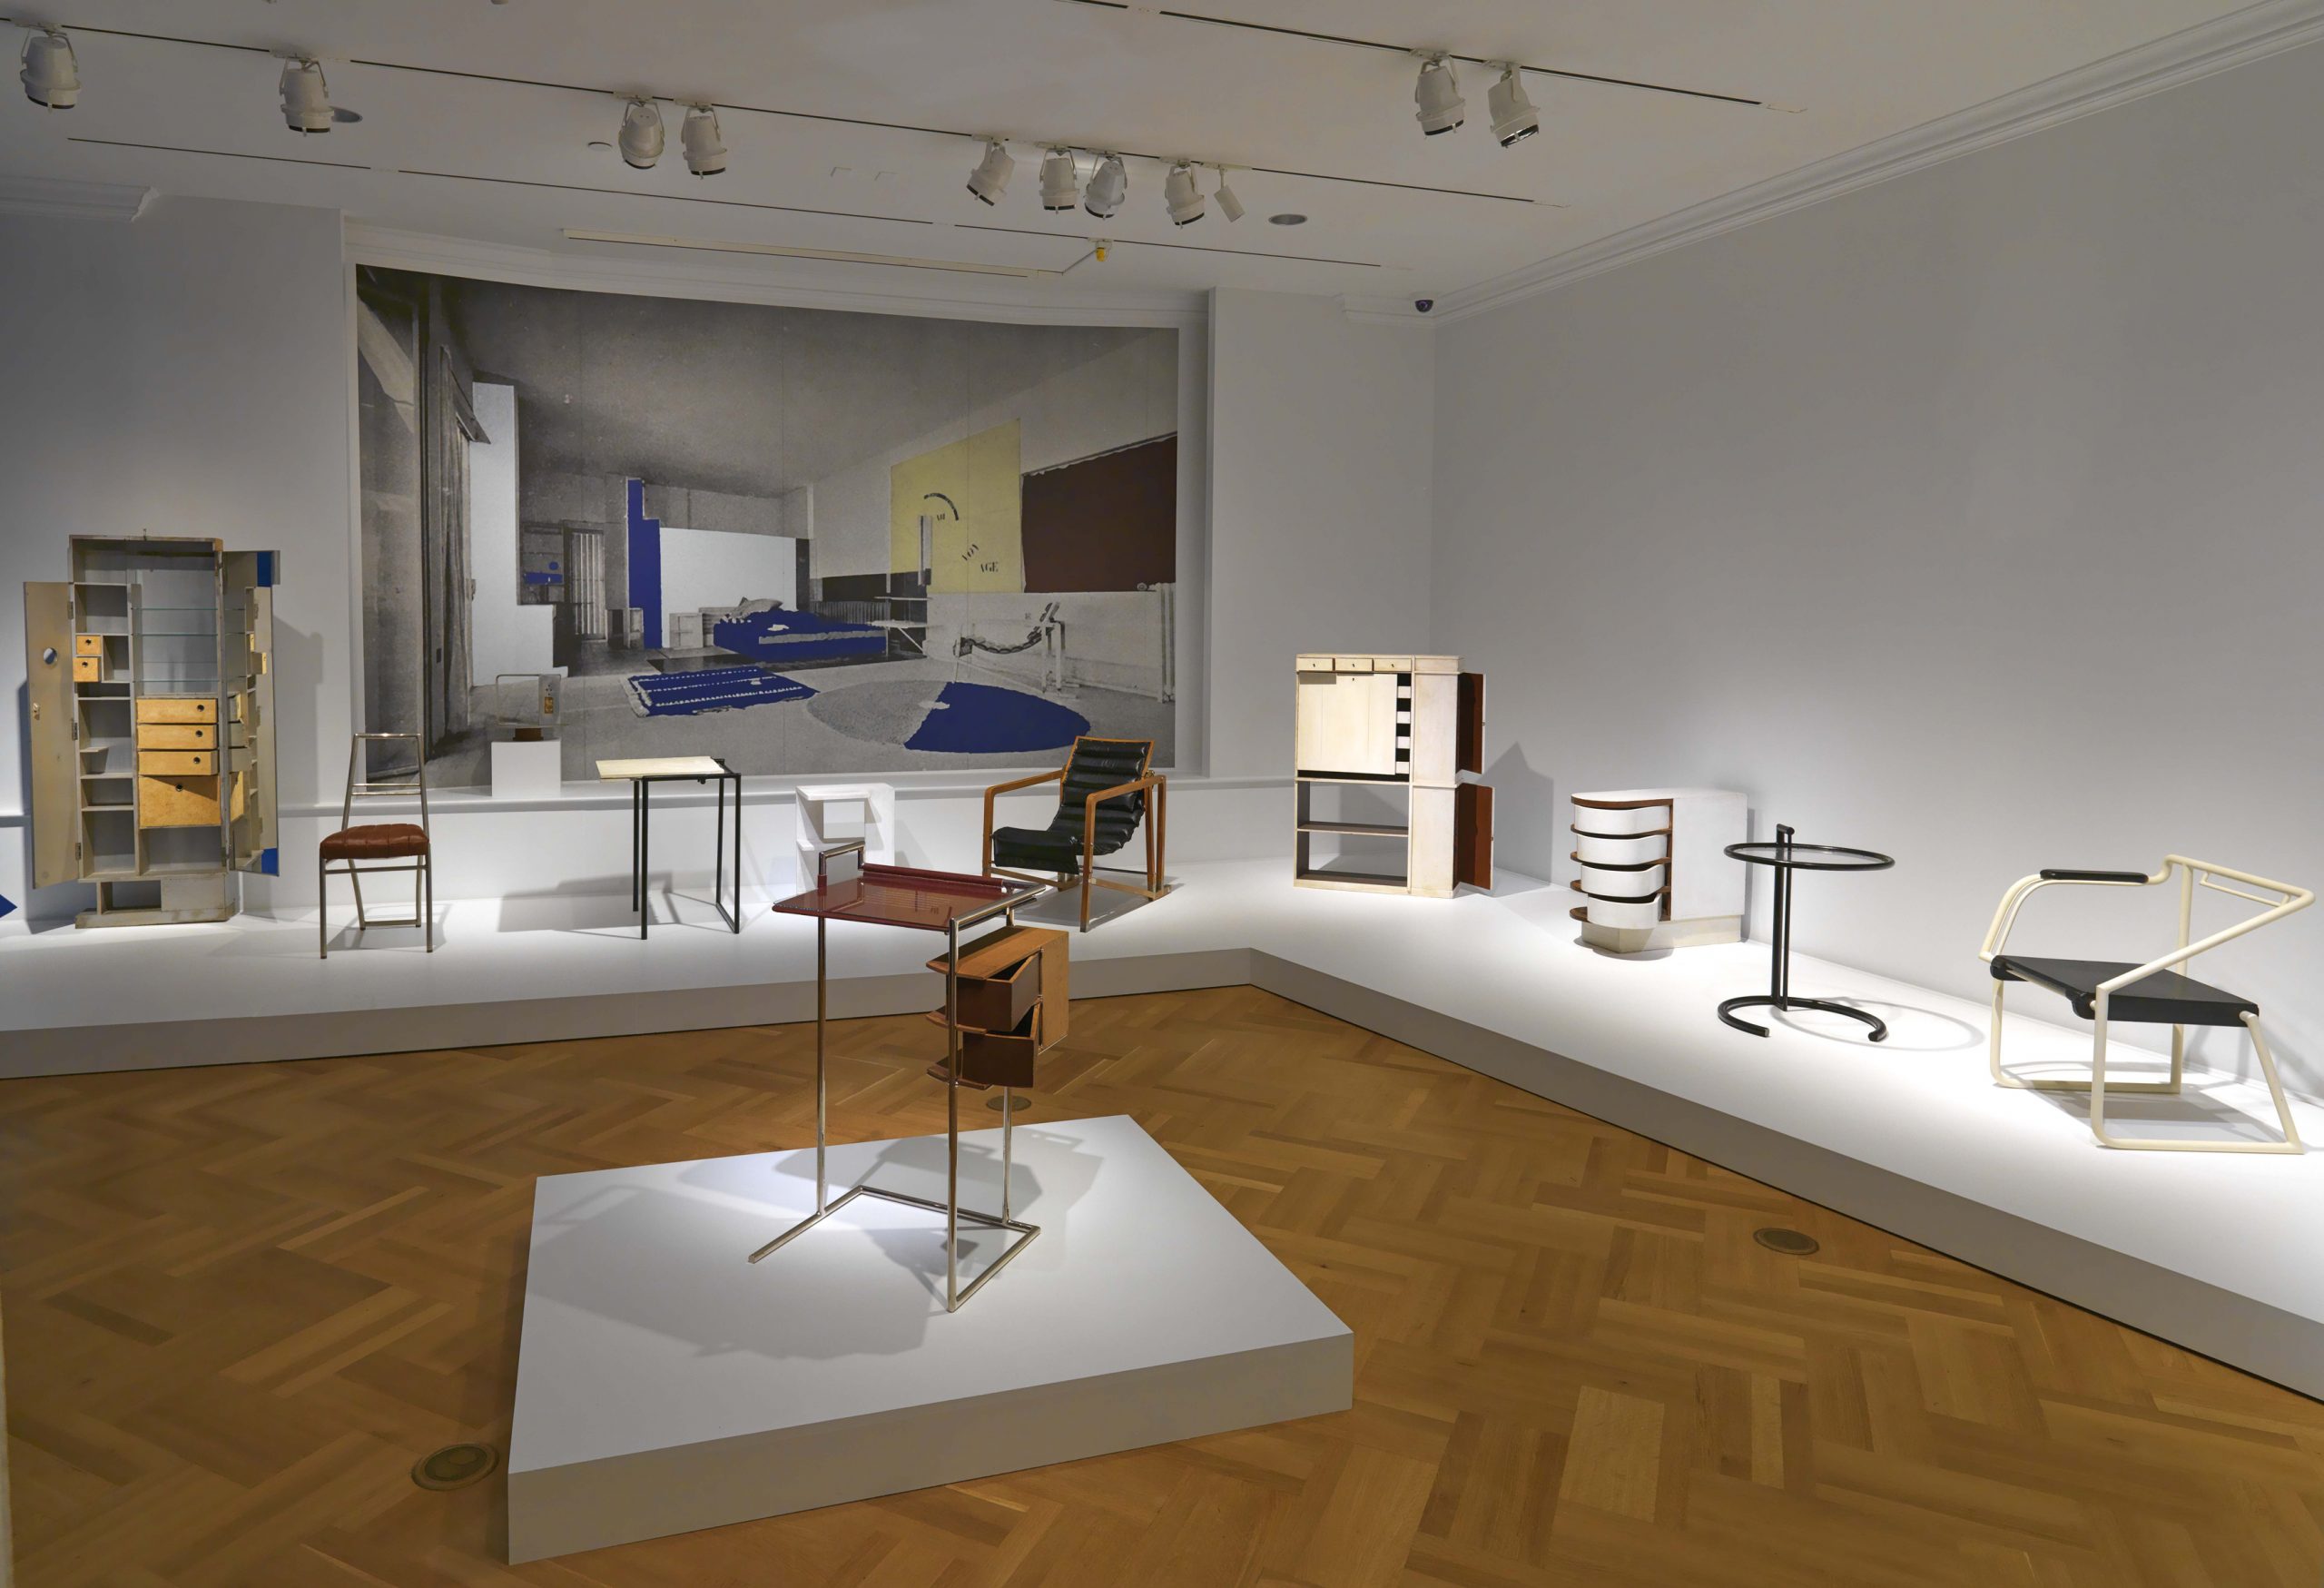 Exhibition image of table on central pedestal and multiple pieces of furniture on platforms.